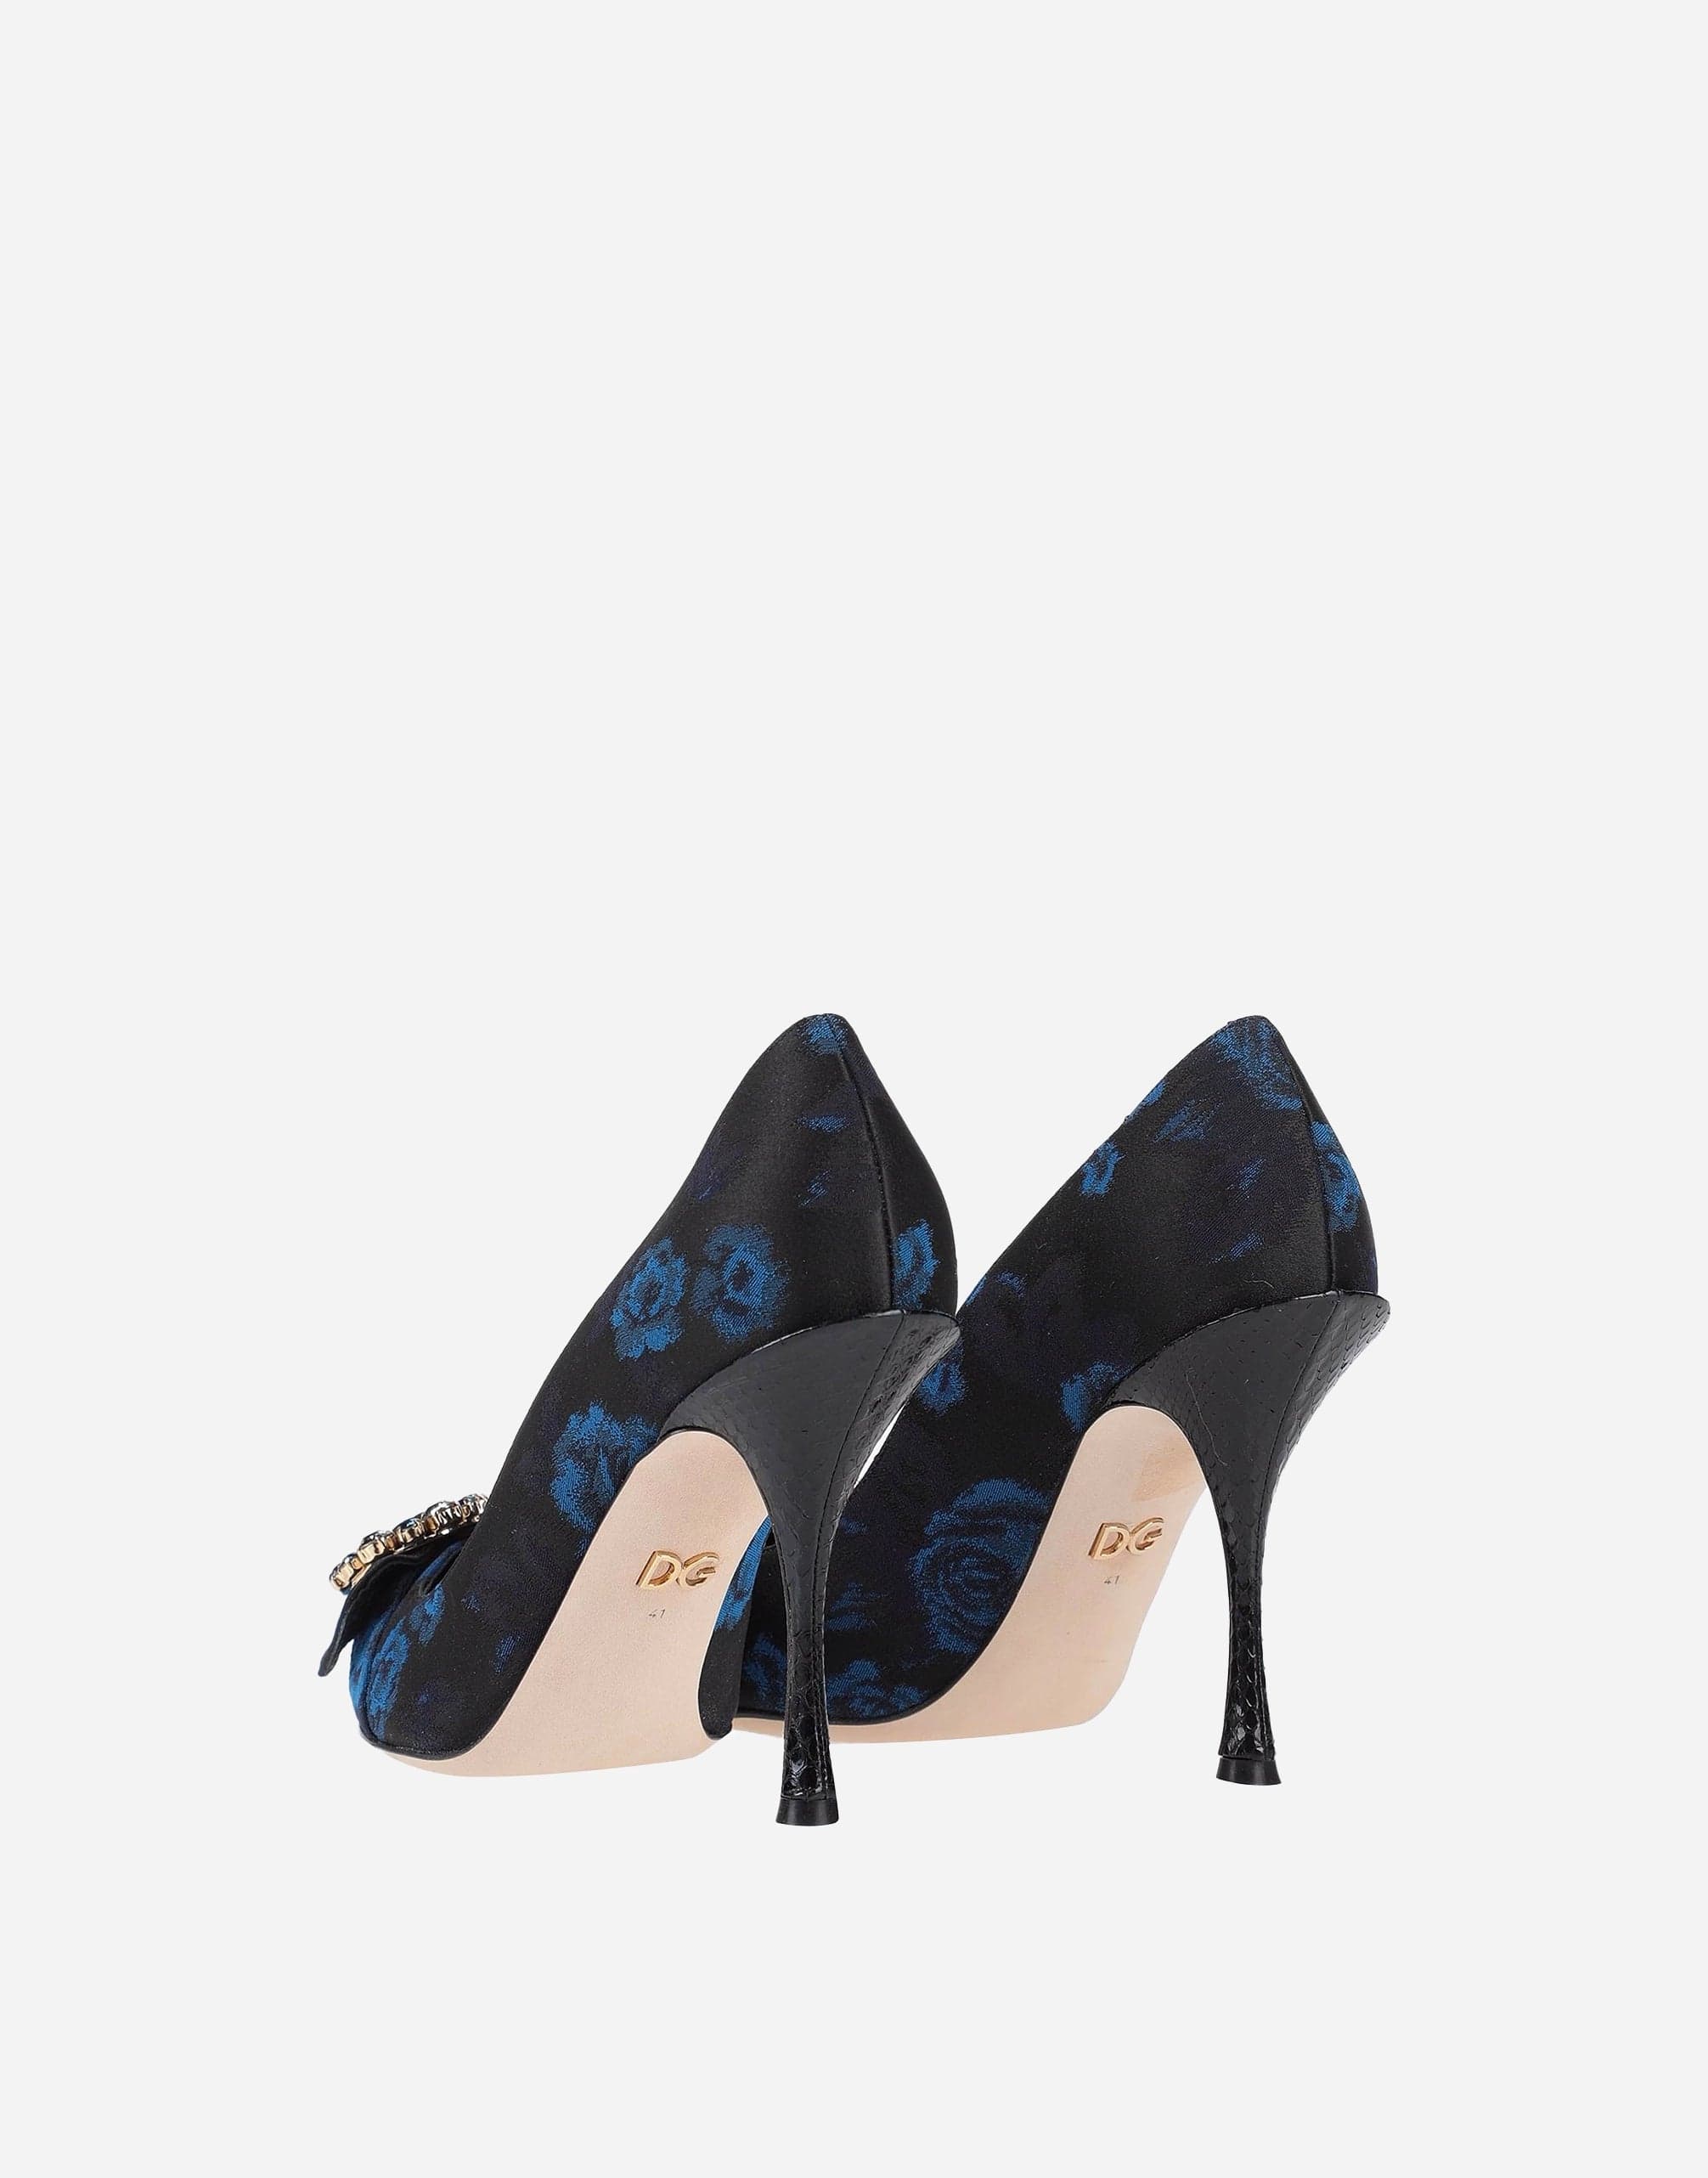 Dolce & Gabbana Blue Floral Ayers Crystal Pumps Shoes